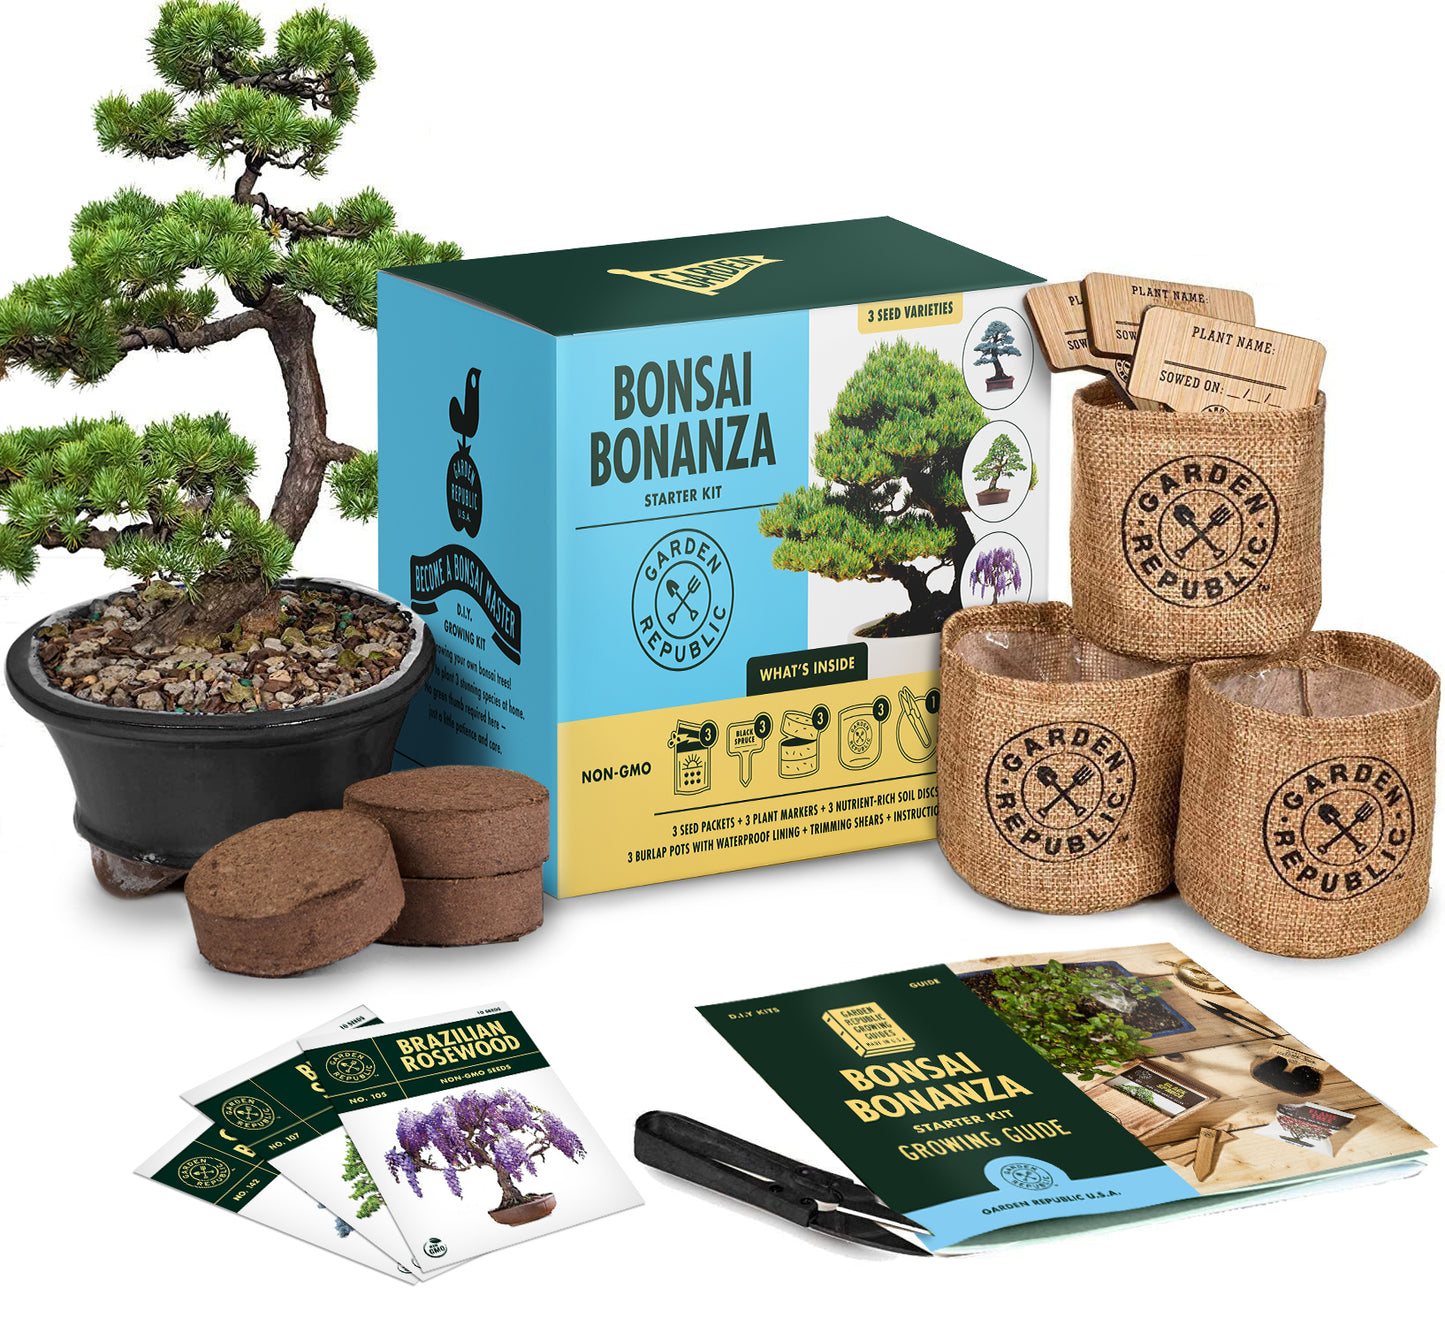 Bonsai Tree KIT - Grow Your OWN Bonsai Trees from Seeds - Gardening Gift  Set - Premium Quality KIT - Big Value Pack, Seed Germination Starter Kit  with